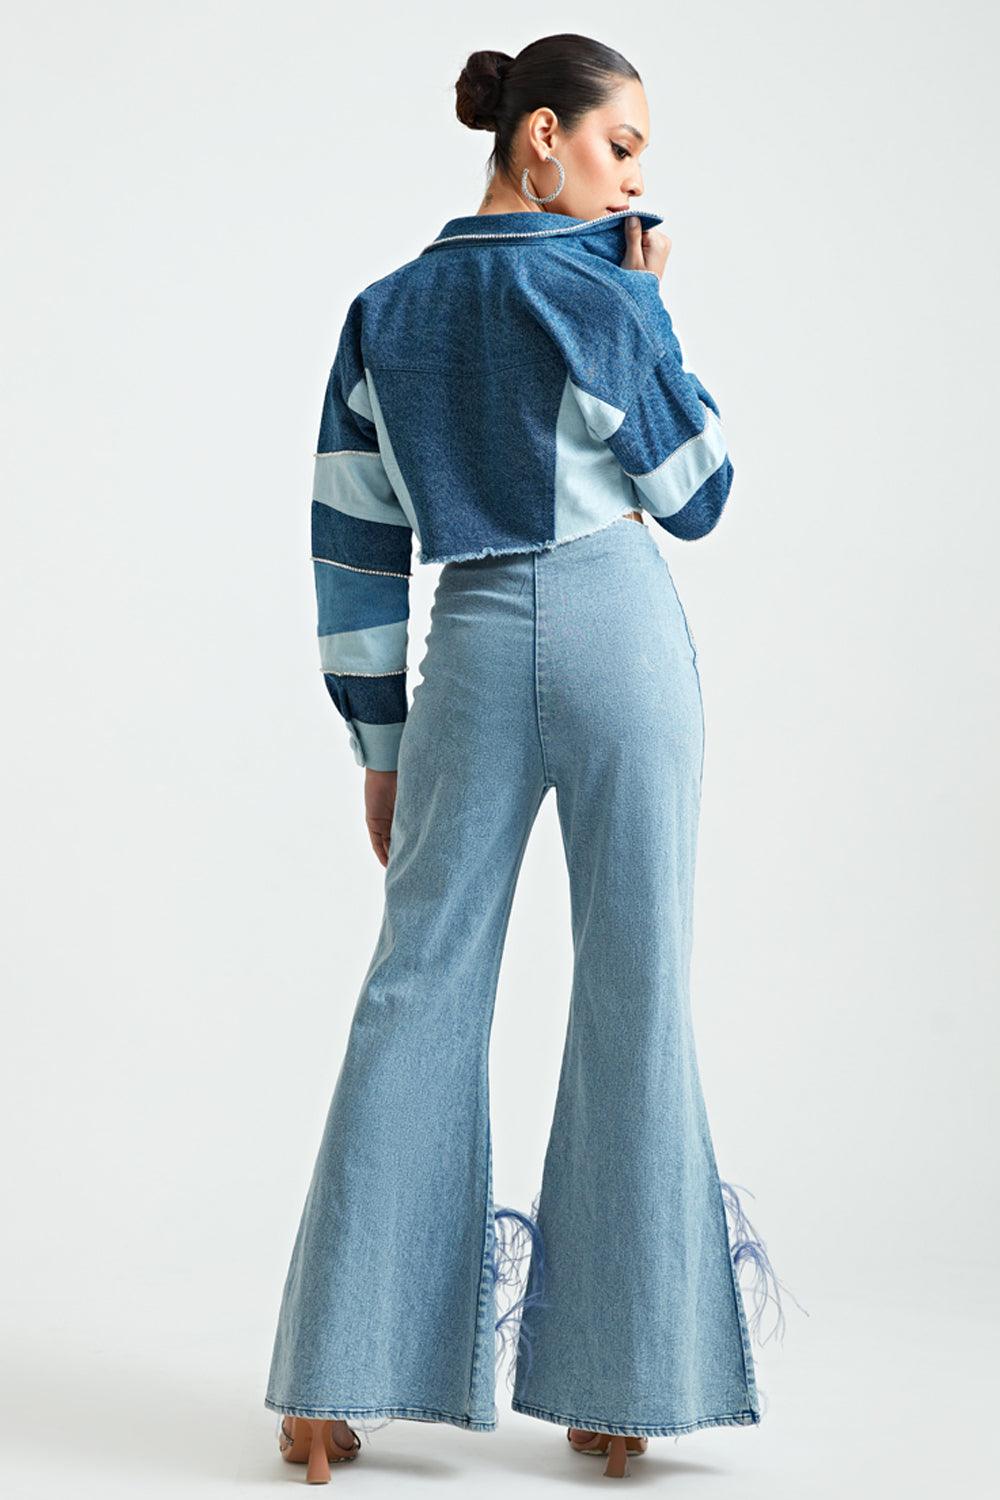 Blue Feather Jeans - ANI CLOTHING